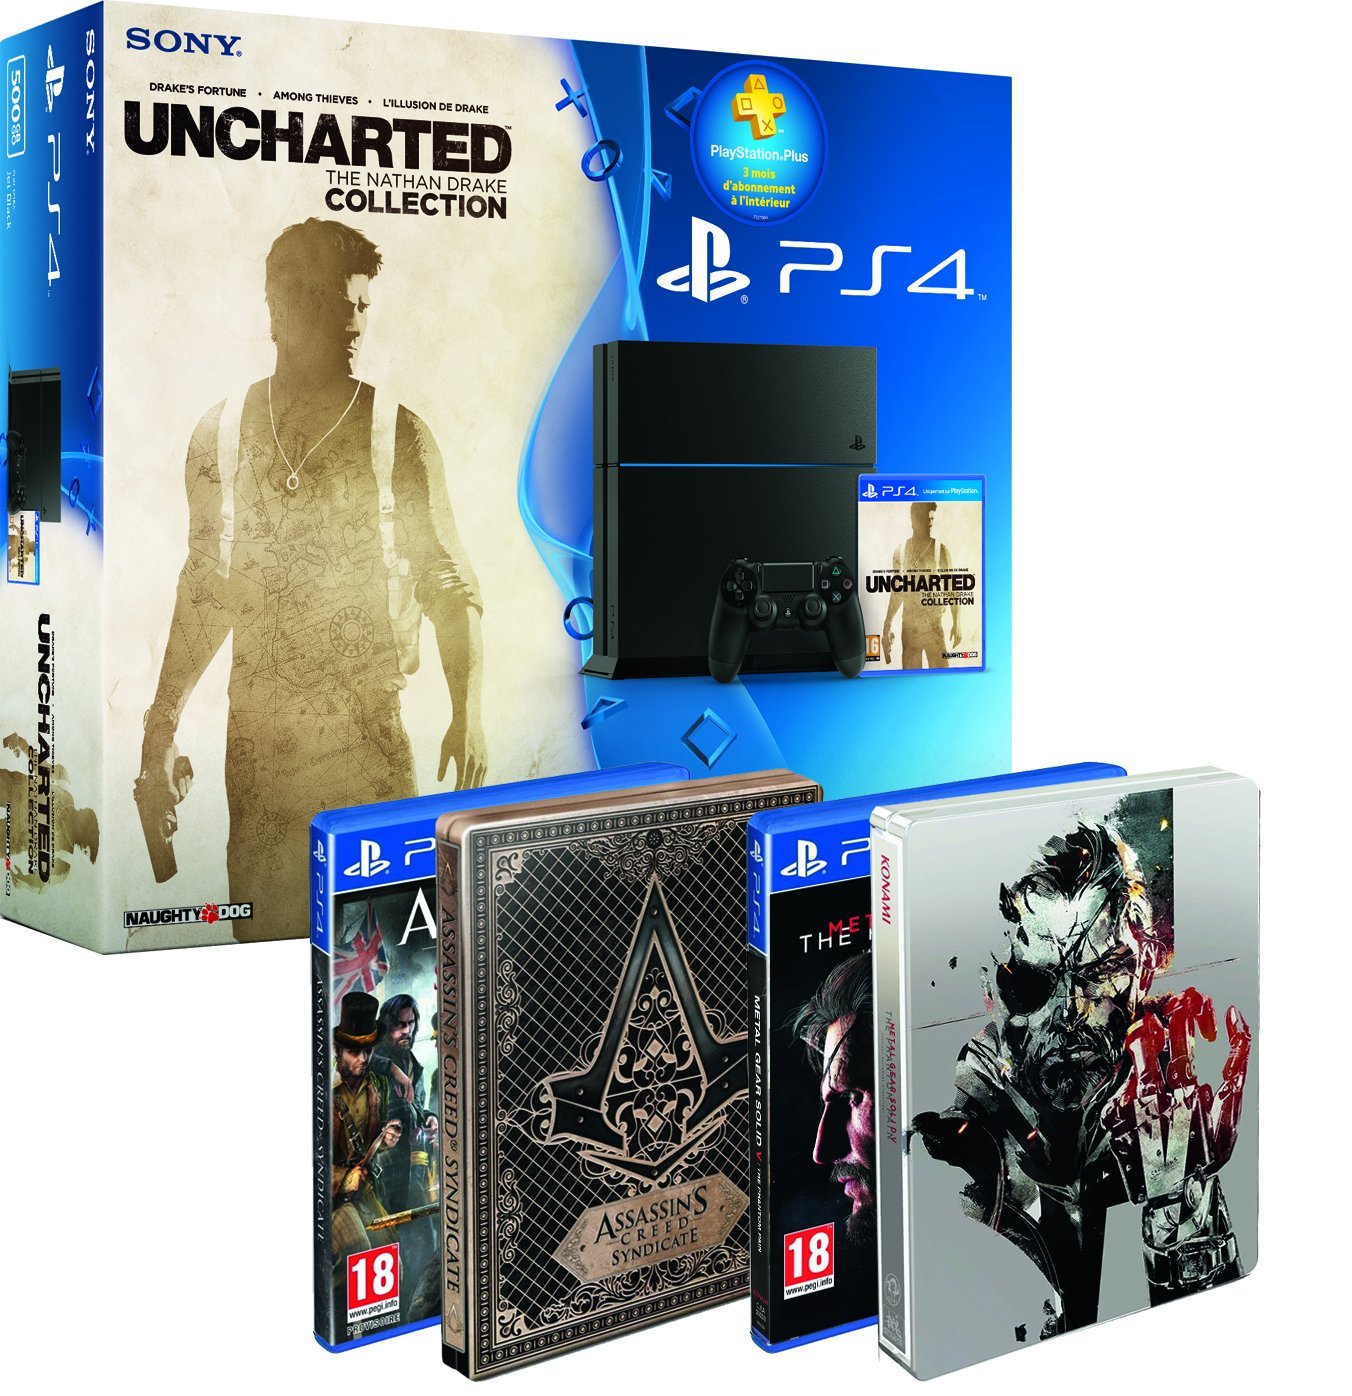 pack-ps4-uncharted-collection-assassins-creed-syndicate-metal-gear-solid-v-the-phantom-pain-2-steelbook